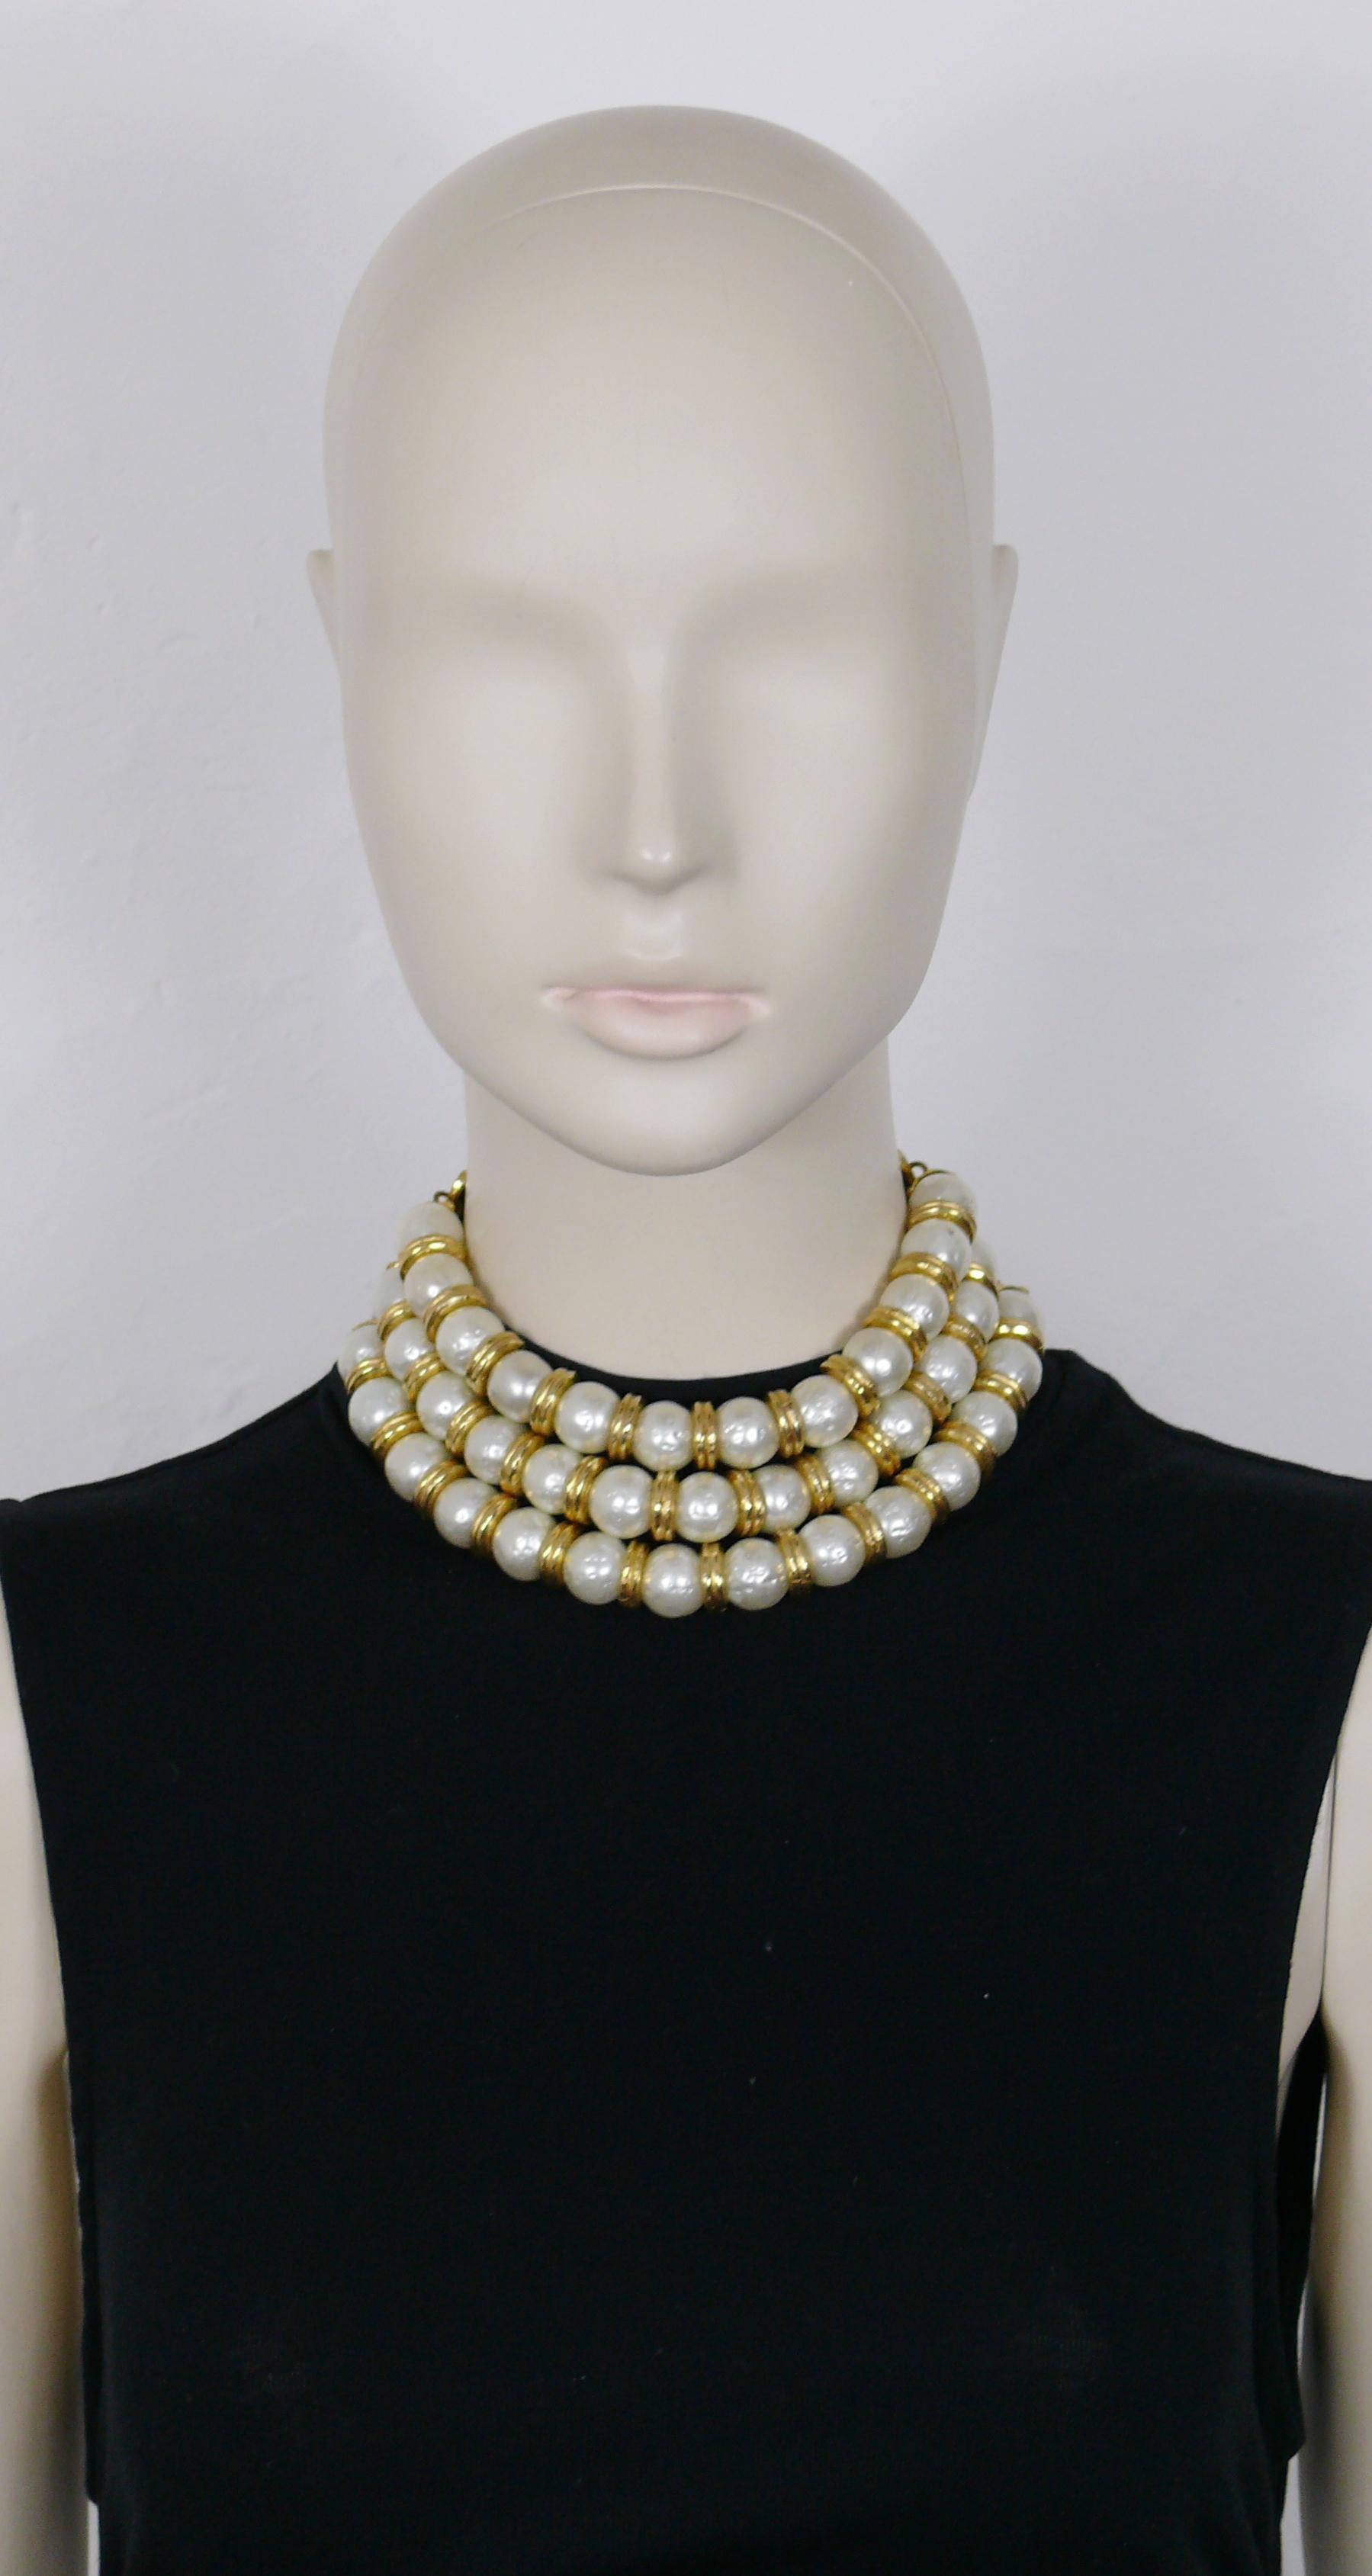 EDOUARD RAMBAUD vintage three strand choker necklace featuring large textured faux pearls in a gold toned setting.

Adjustable hook clasp closure.
Extension chain.

Marked EDOUARD RAMBAUD Paris.

Indicative measurements : adjustable length from